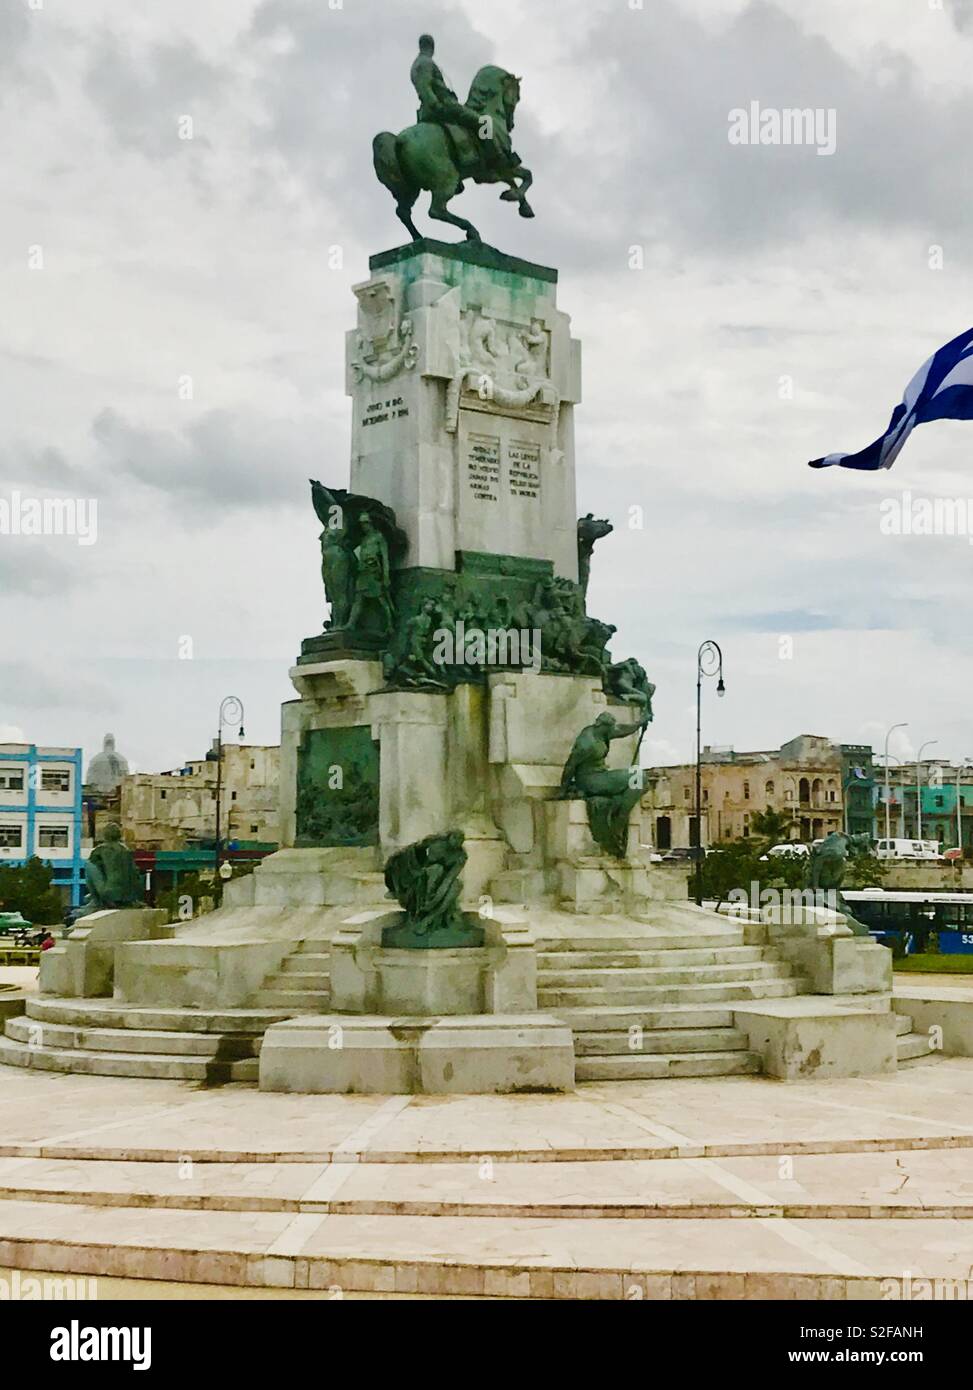 Lieutenant General José Antonio de la Caridad Maceo y Grajales was second-in-command of the Cuban Army of Independence, one of the Guerilla Leaders. Monument of Antonio Maceo upon a horse. Stock Photo